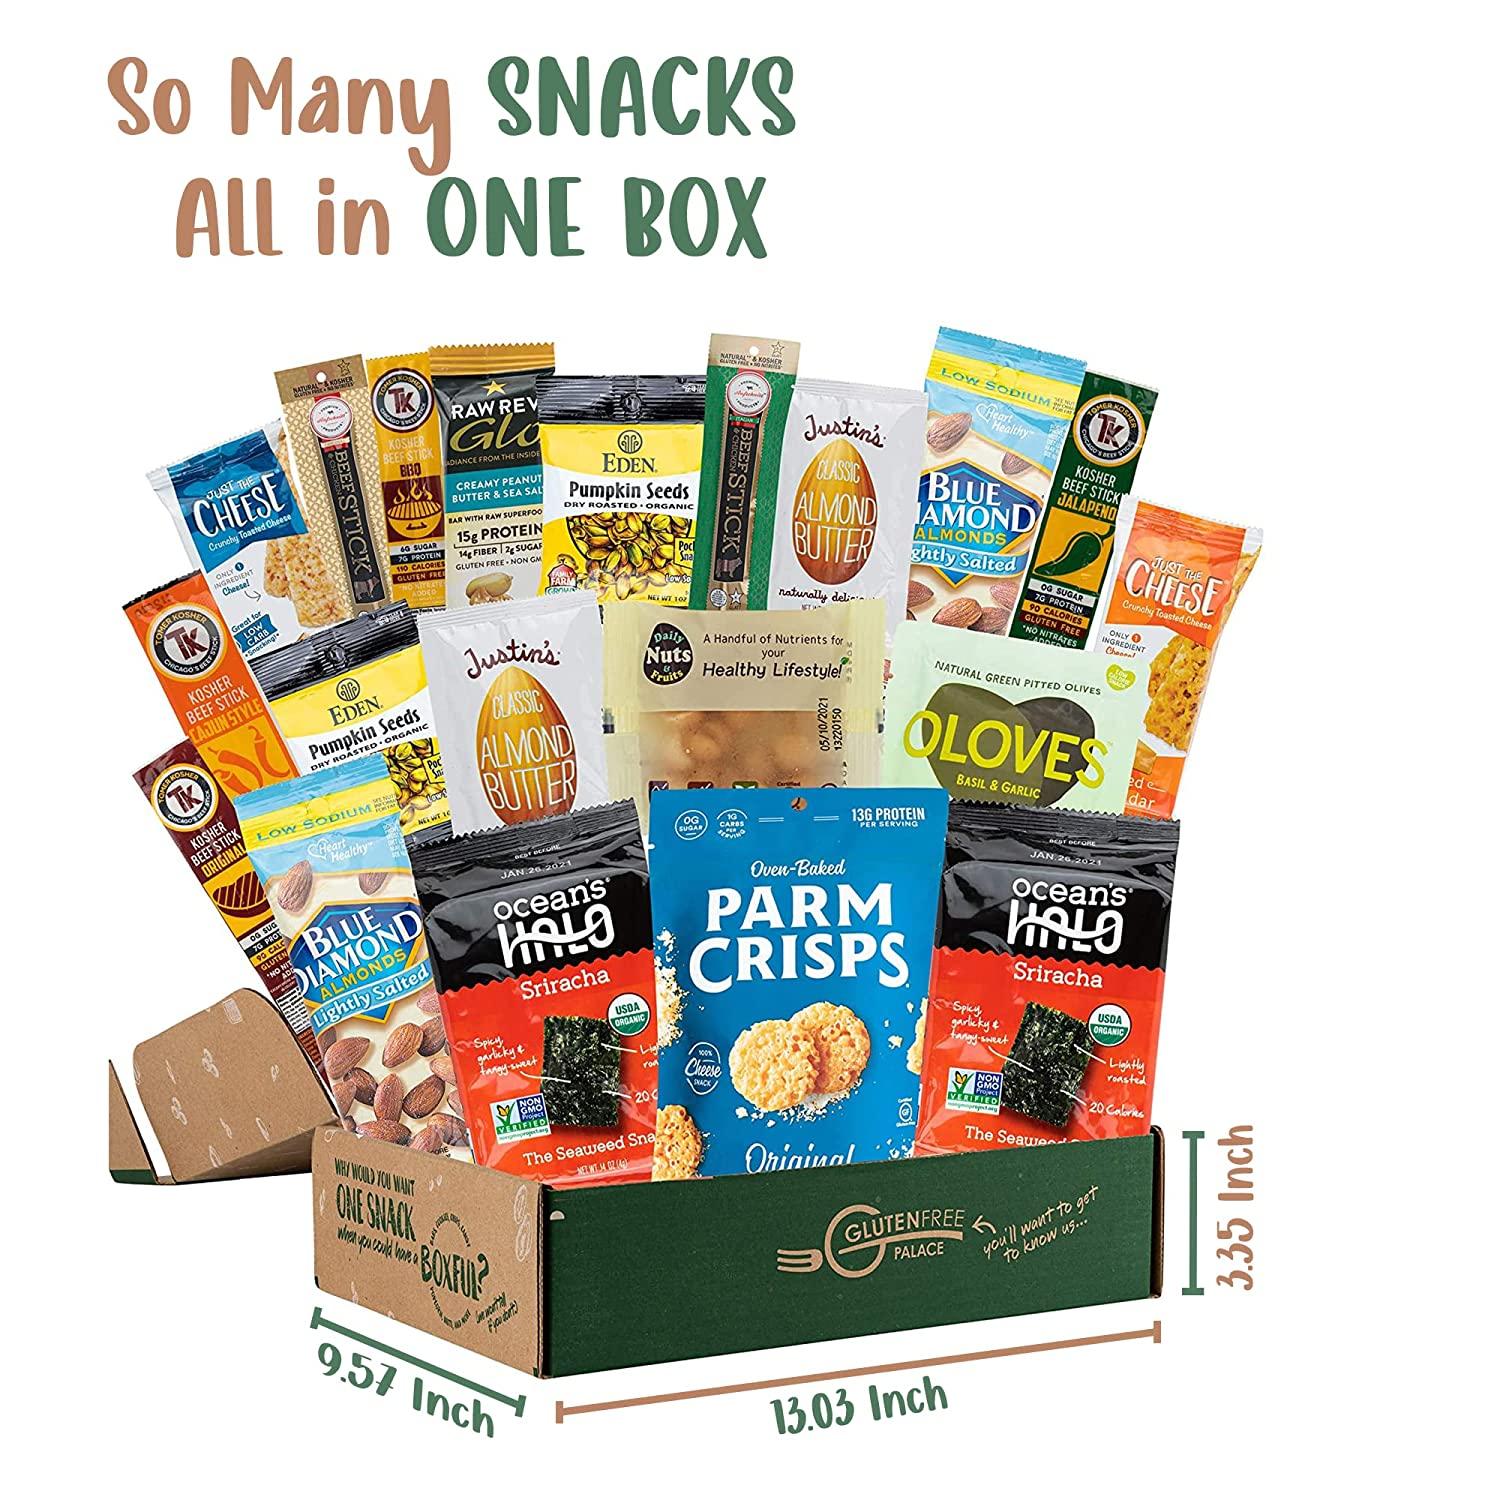 Keto Snack Box Gift Basket - Ultra Low Carb, 5G Net Carbs or Less, Low  Sugar - High Fat Keto-Friendly Snacks for Men, Women & Adults - Ketogenic  Care